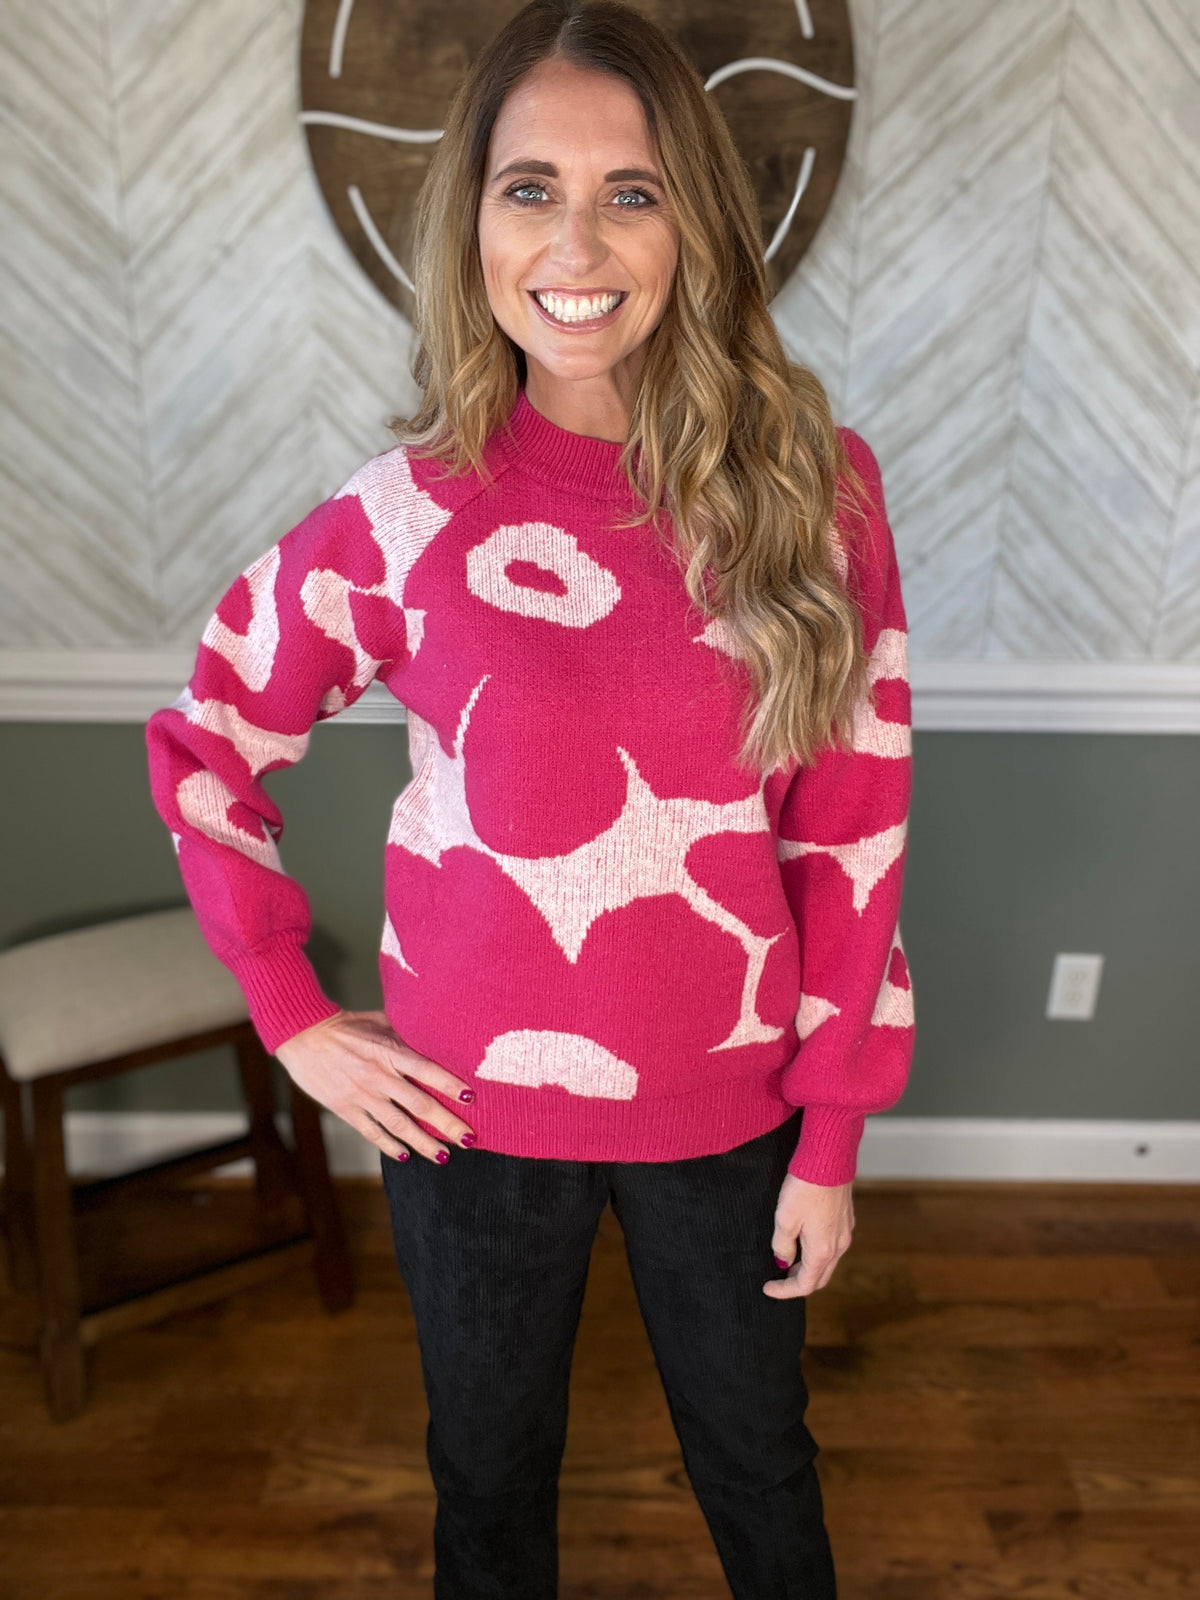 The Noelle Sweater